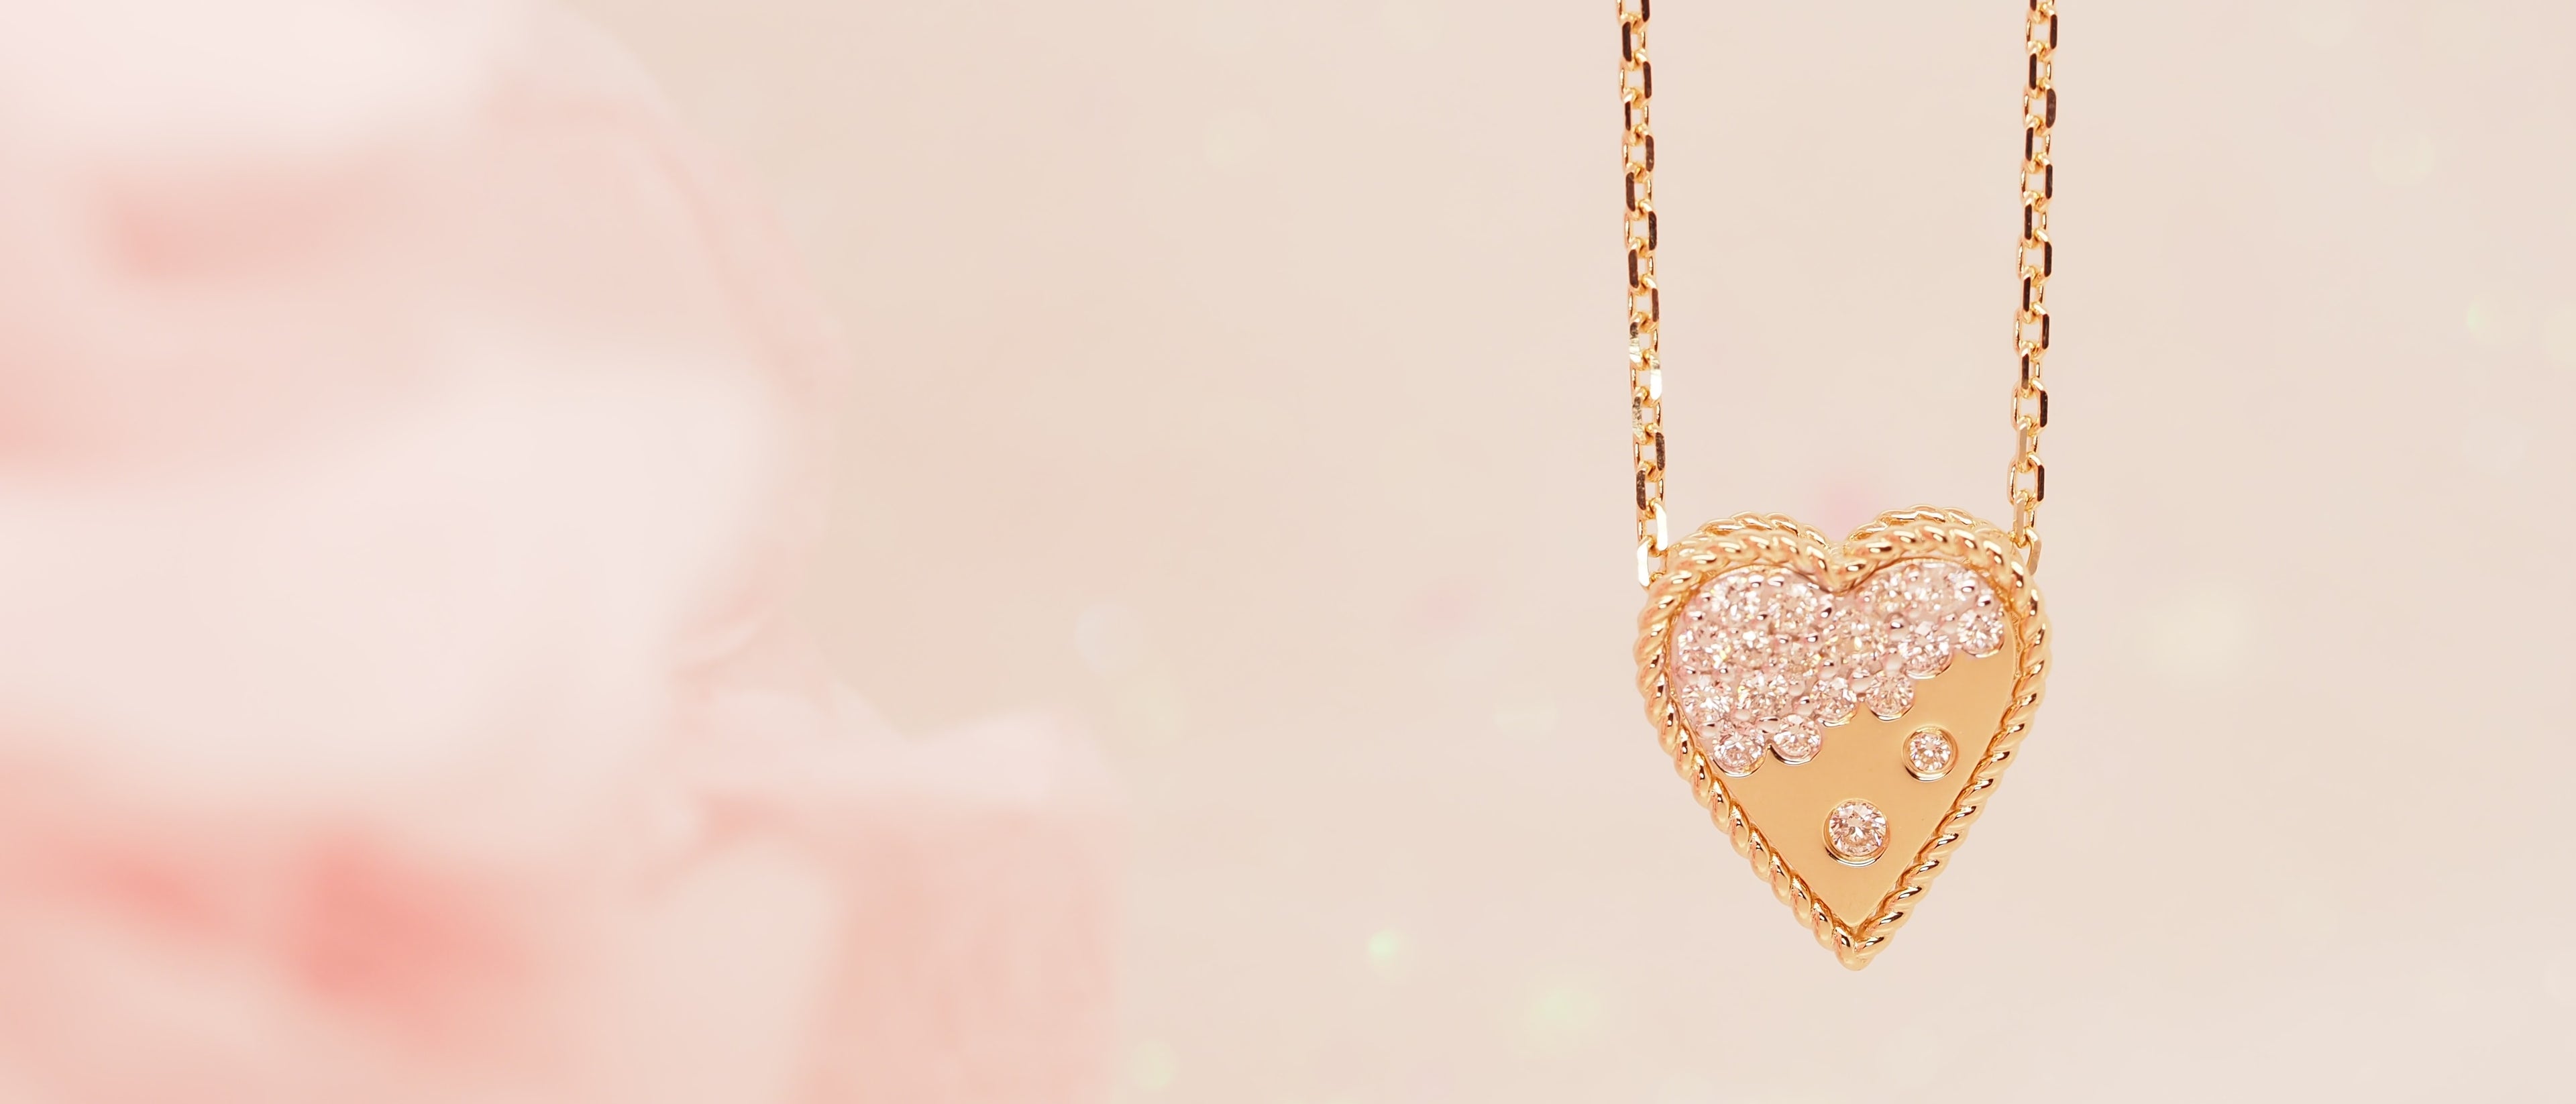 A heart-shaped necklace encrusted with diamonds on a chain